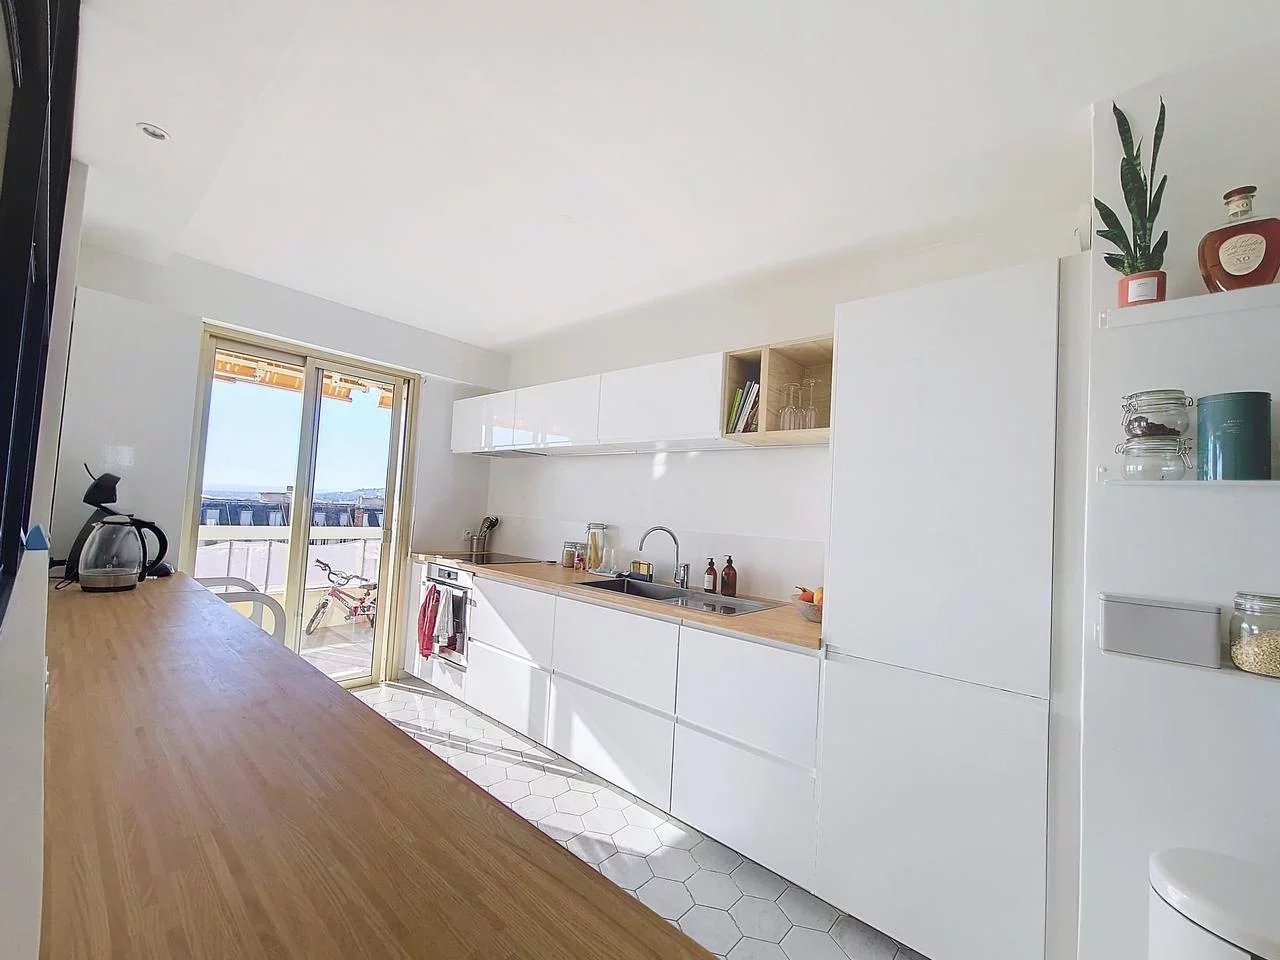 Appartement  4 Rooms 101.09m2  for sale   835 000 €